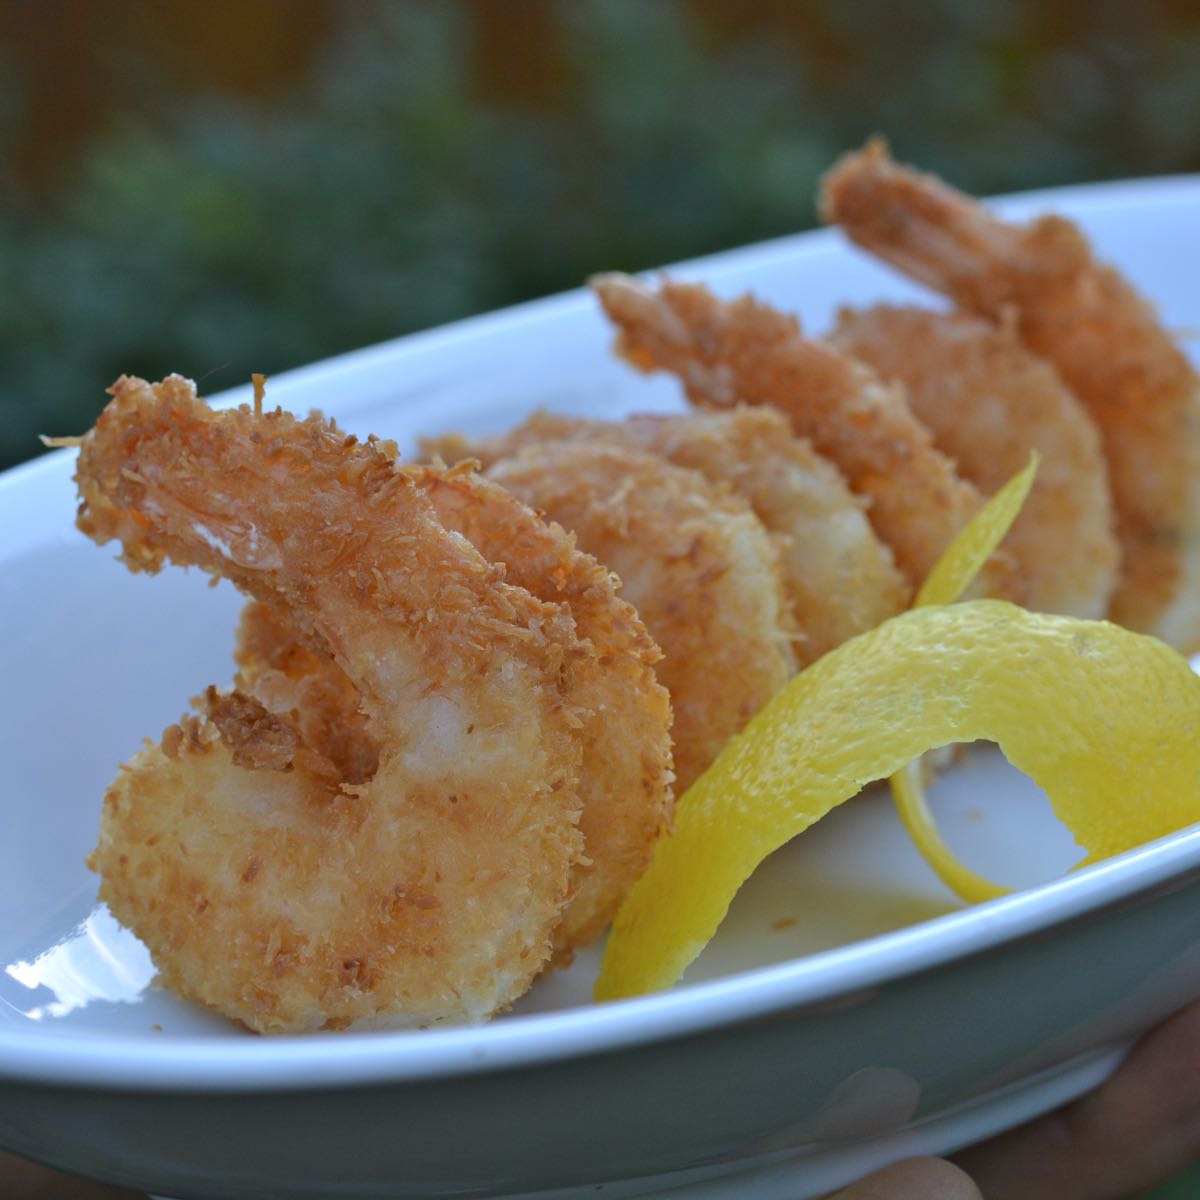 A serving dish filled with gluten free coconut shrimp garnished with a twist of lemon.